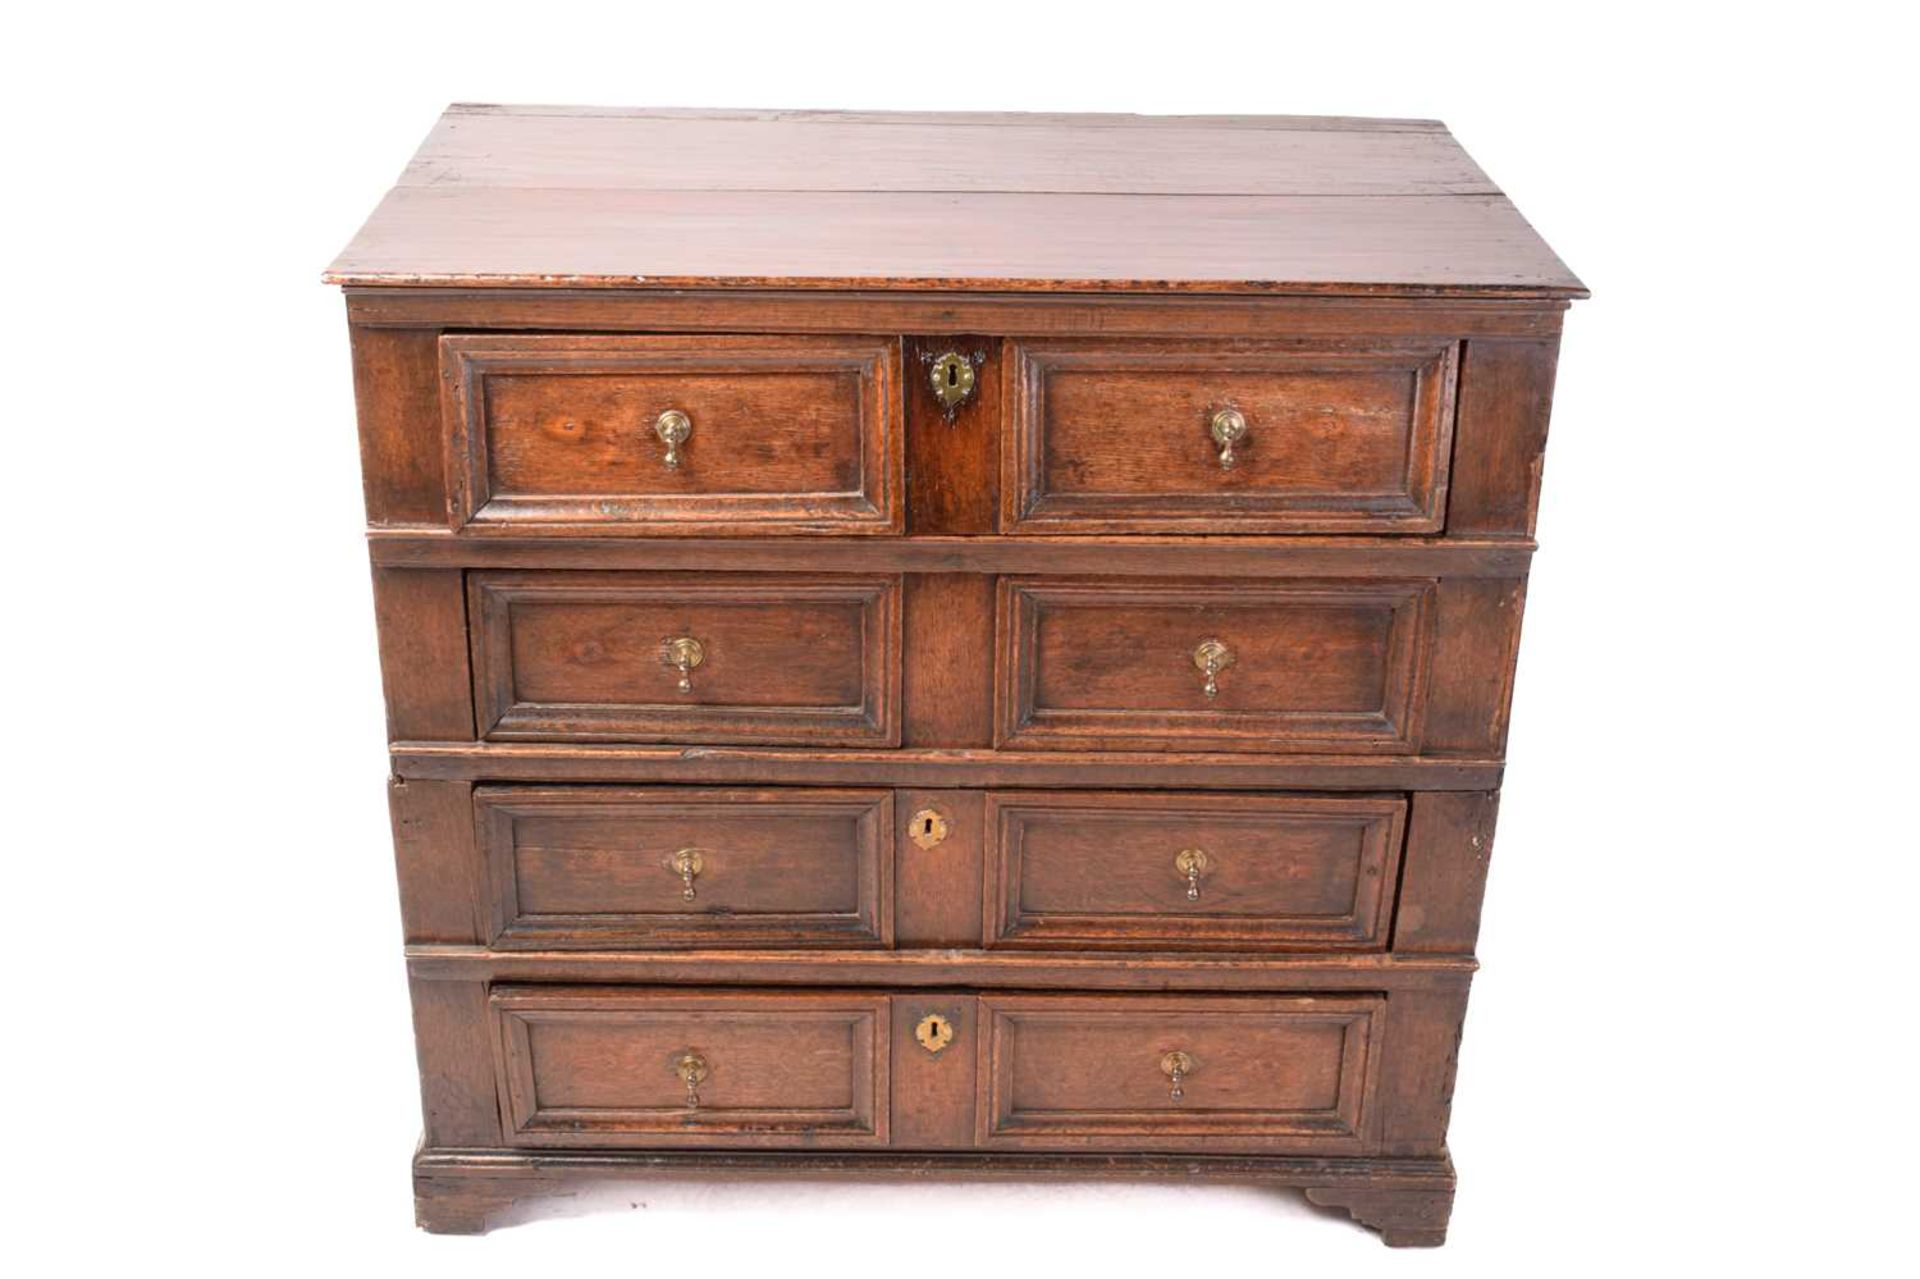 A Charles II oak two-section chest of four drawers with simple moulded drawer fronts and panel